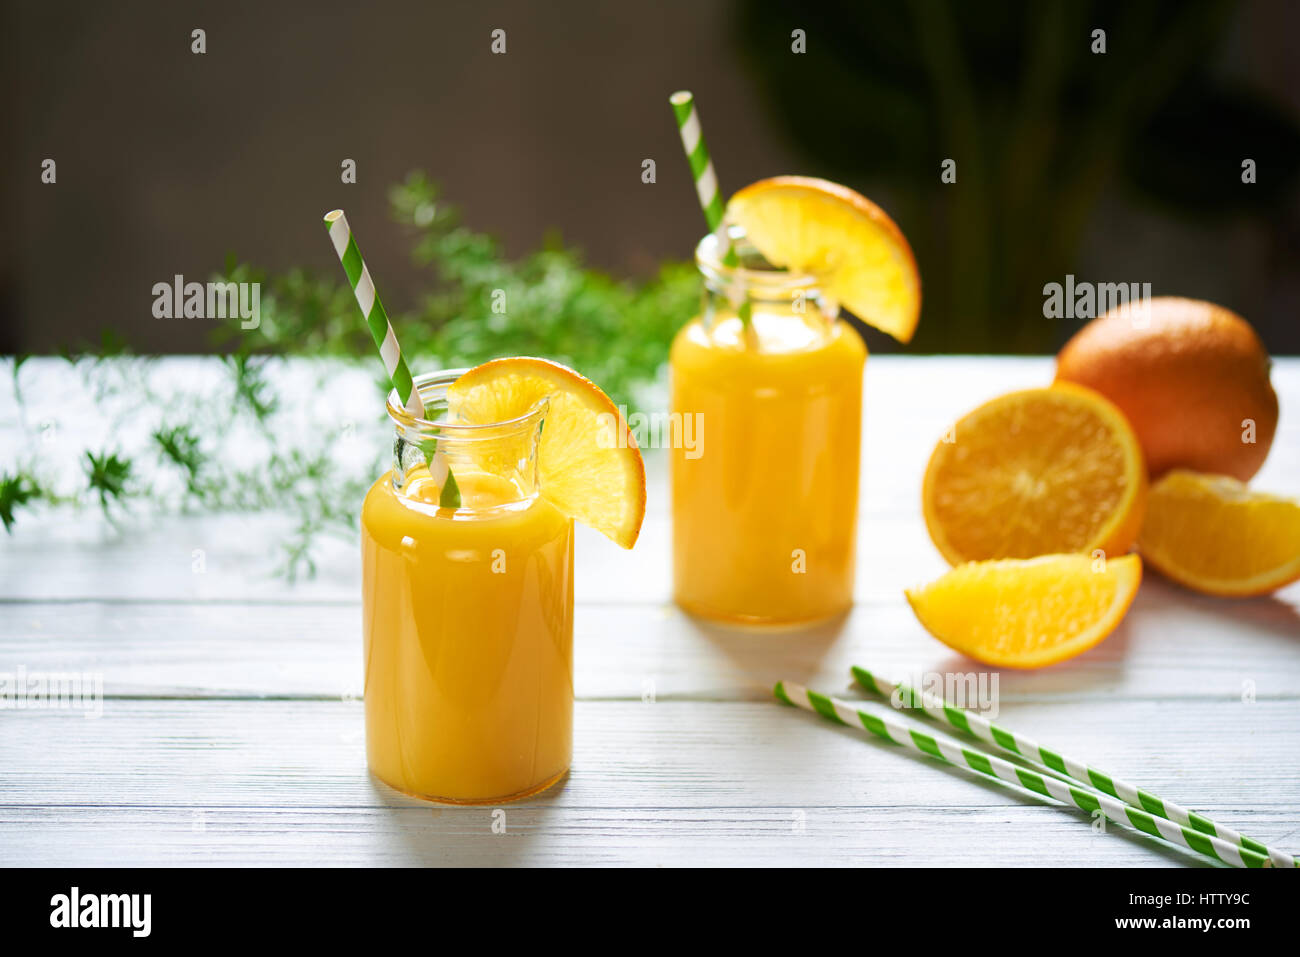 Glass Full Of Orange Juice, Carafe With Fresh Juice, Straw And Fresh  Oranges In The Background On Wooden Table Stock Photo, Picture and Royalty  Free Image. Image 105485816.